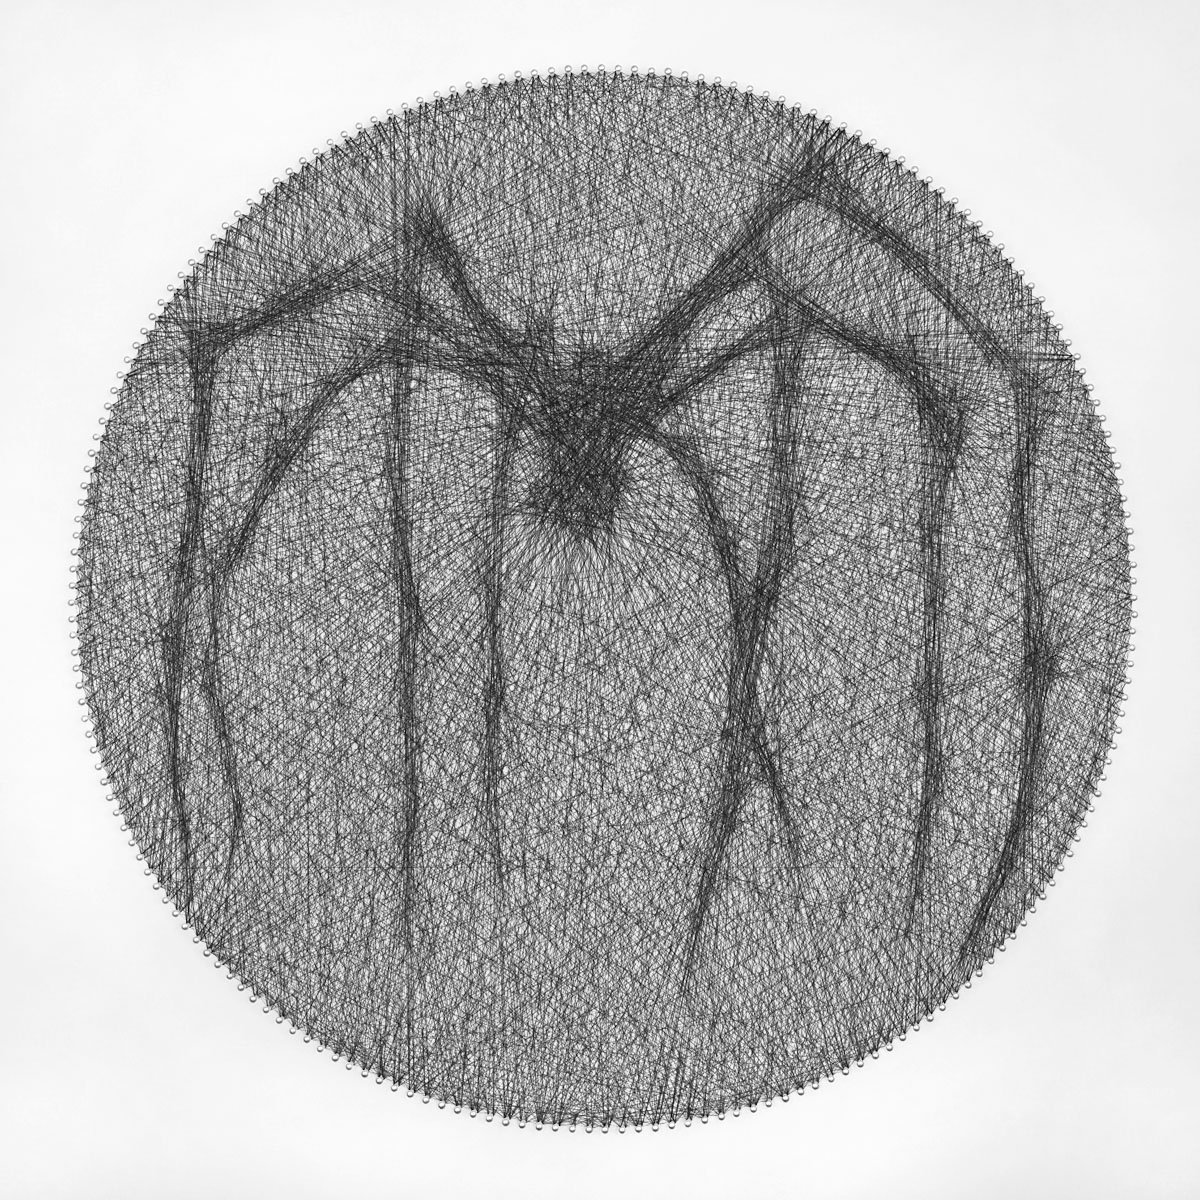 Spider - Louise Bourgeois Tribute by Andrey Saharov